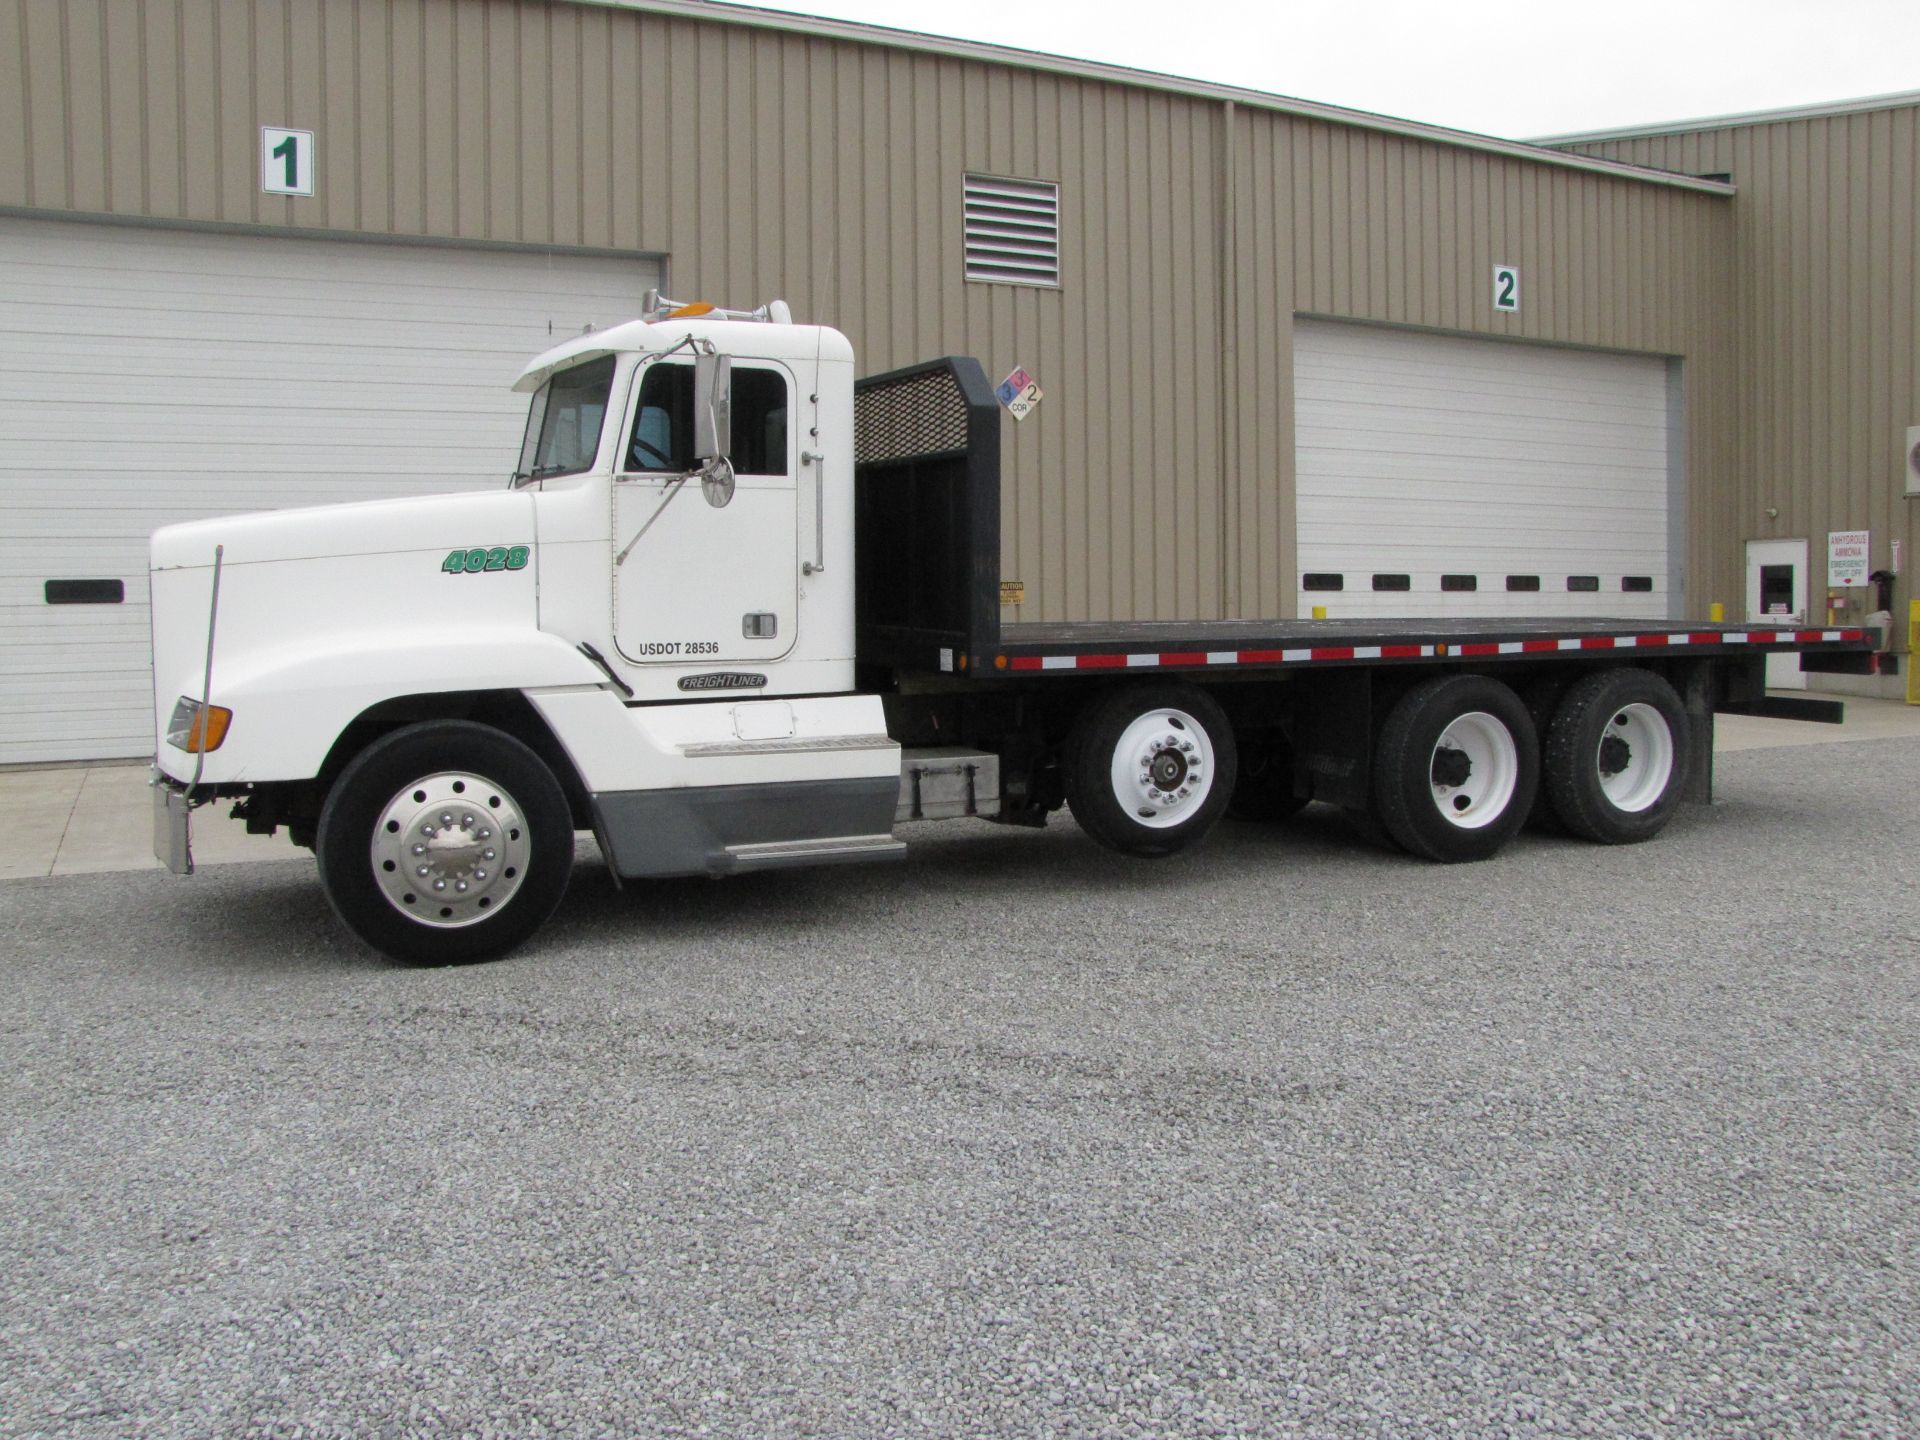 1993 Freightliner FLD120 semi truck - Image 3 of 71